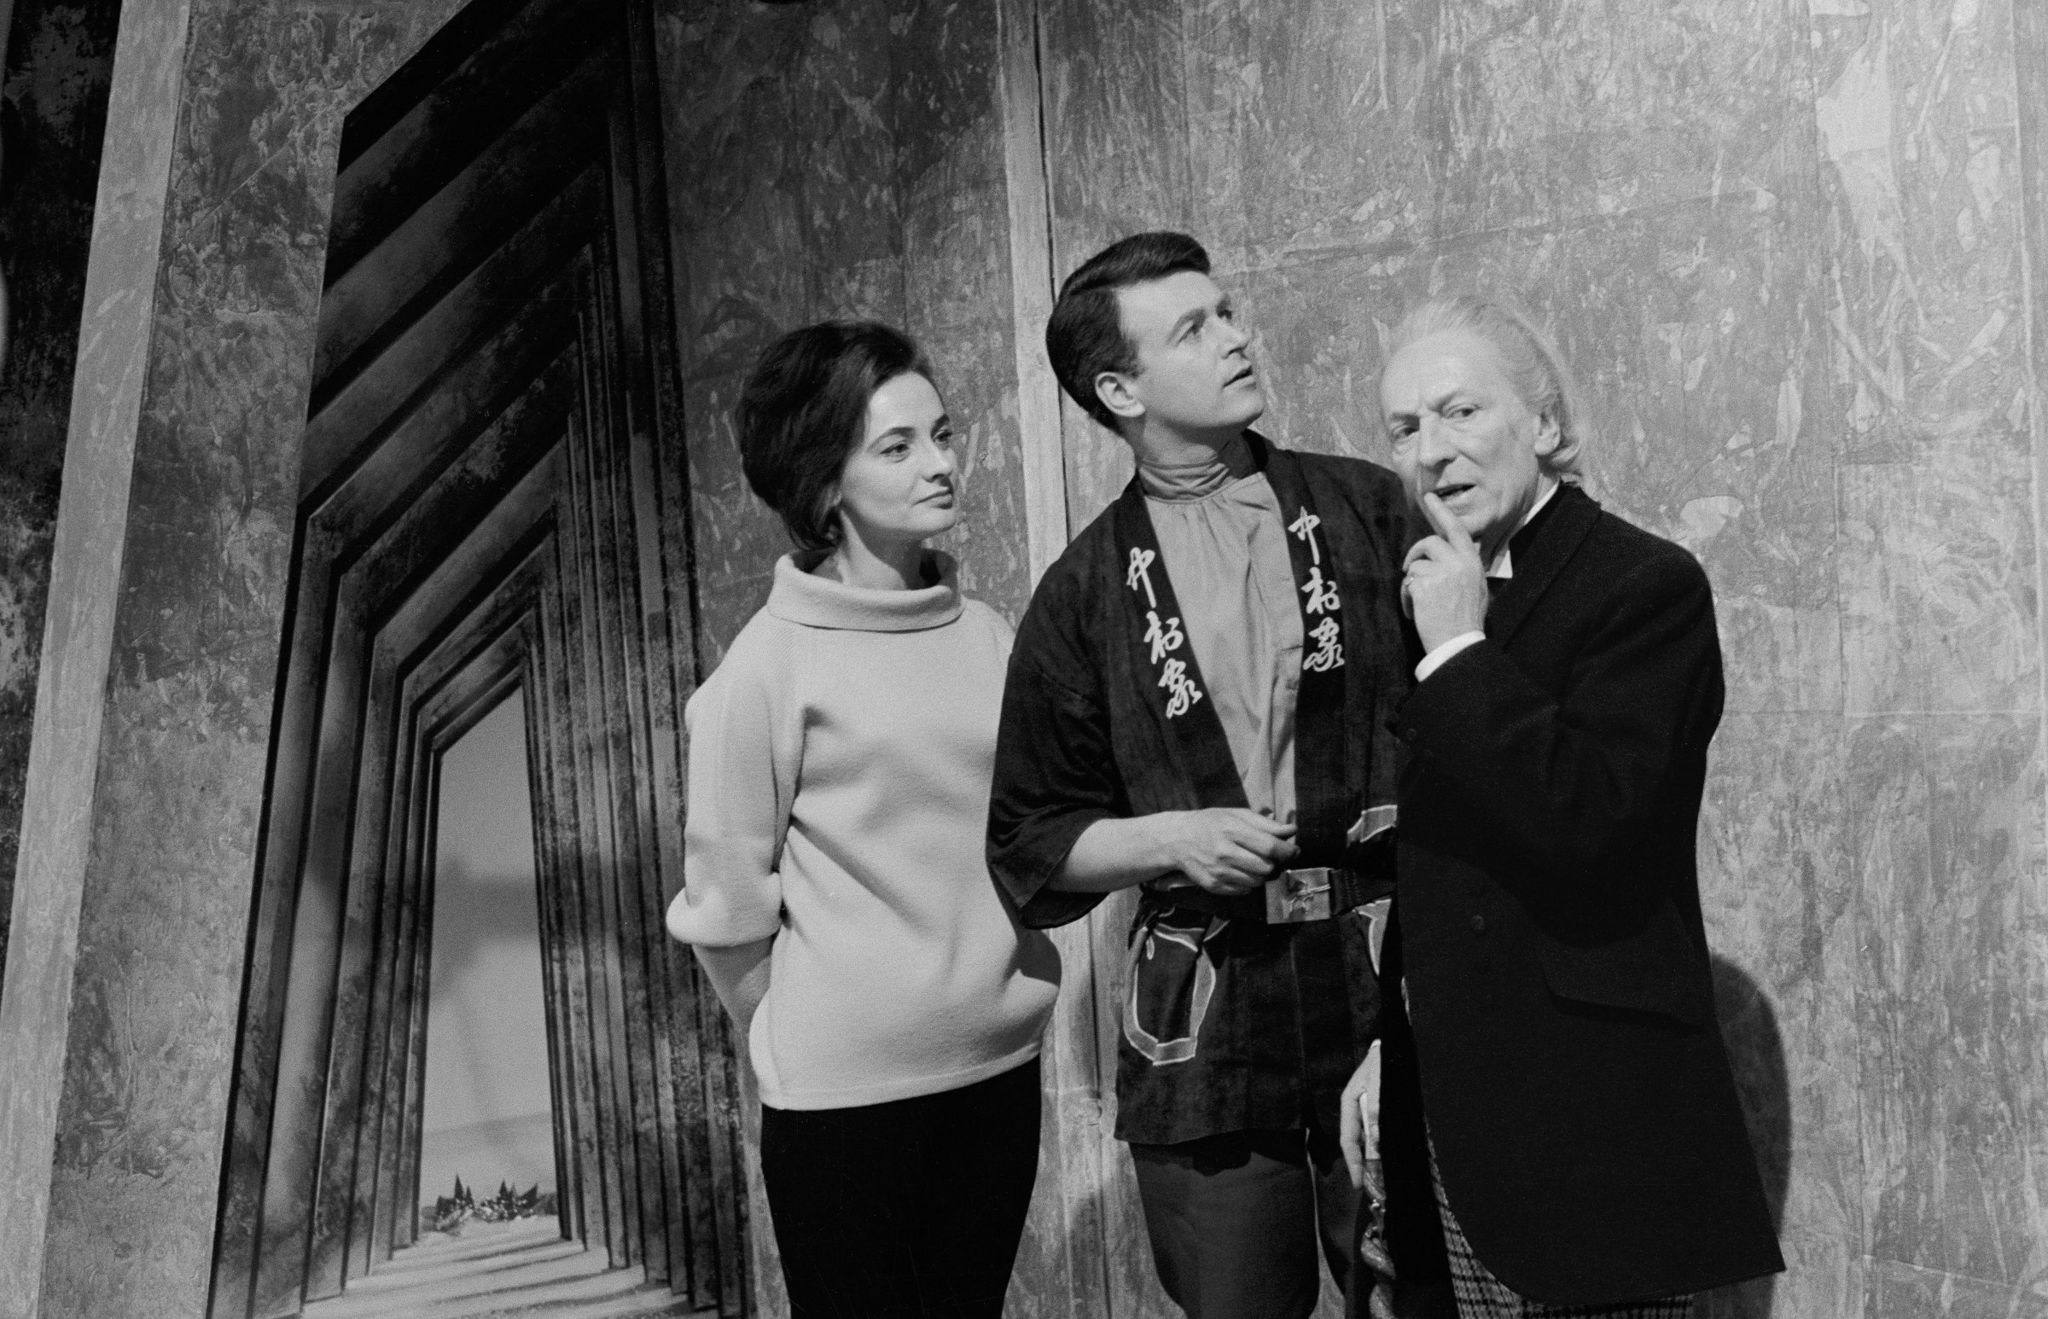 Jacqueline Hill (Barbara Wright), William Russell (Ian) and William Hartnell (The Doctor) explore the mysterious tower in The Keys of Marinus (1963)